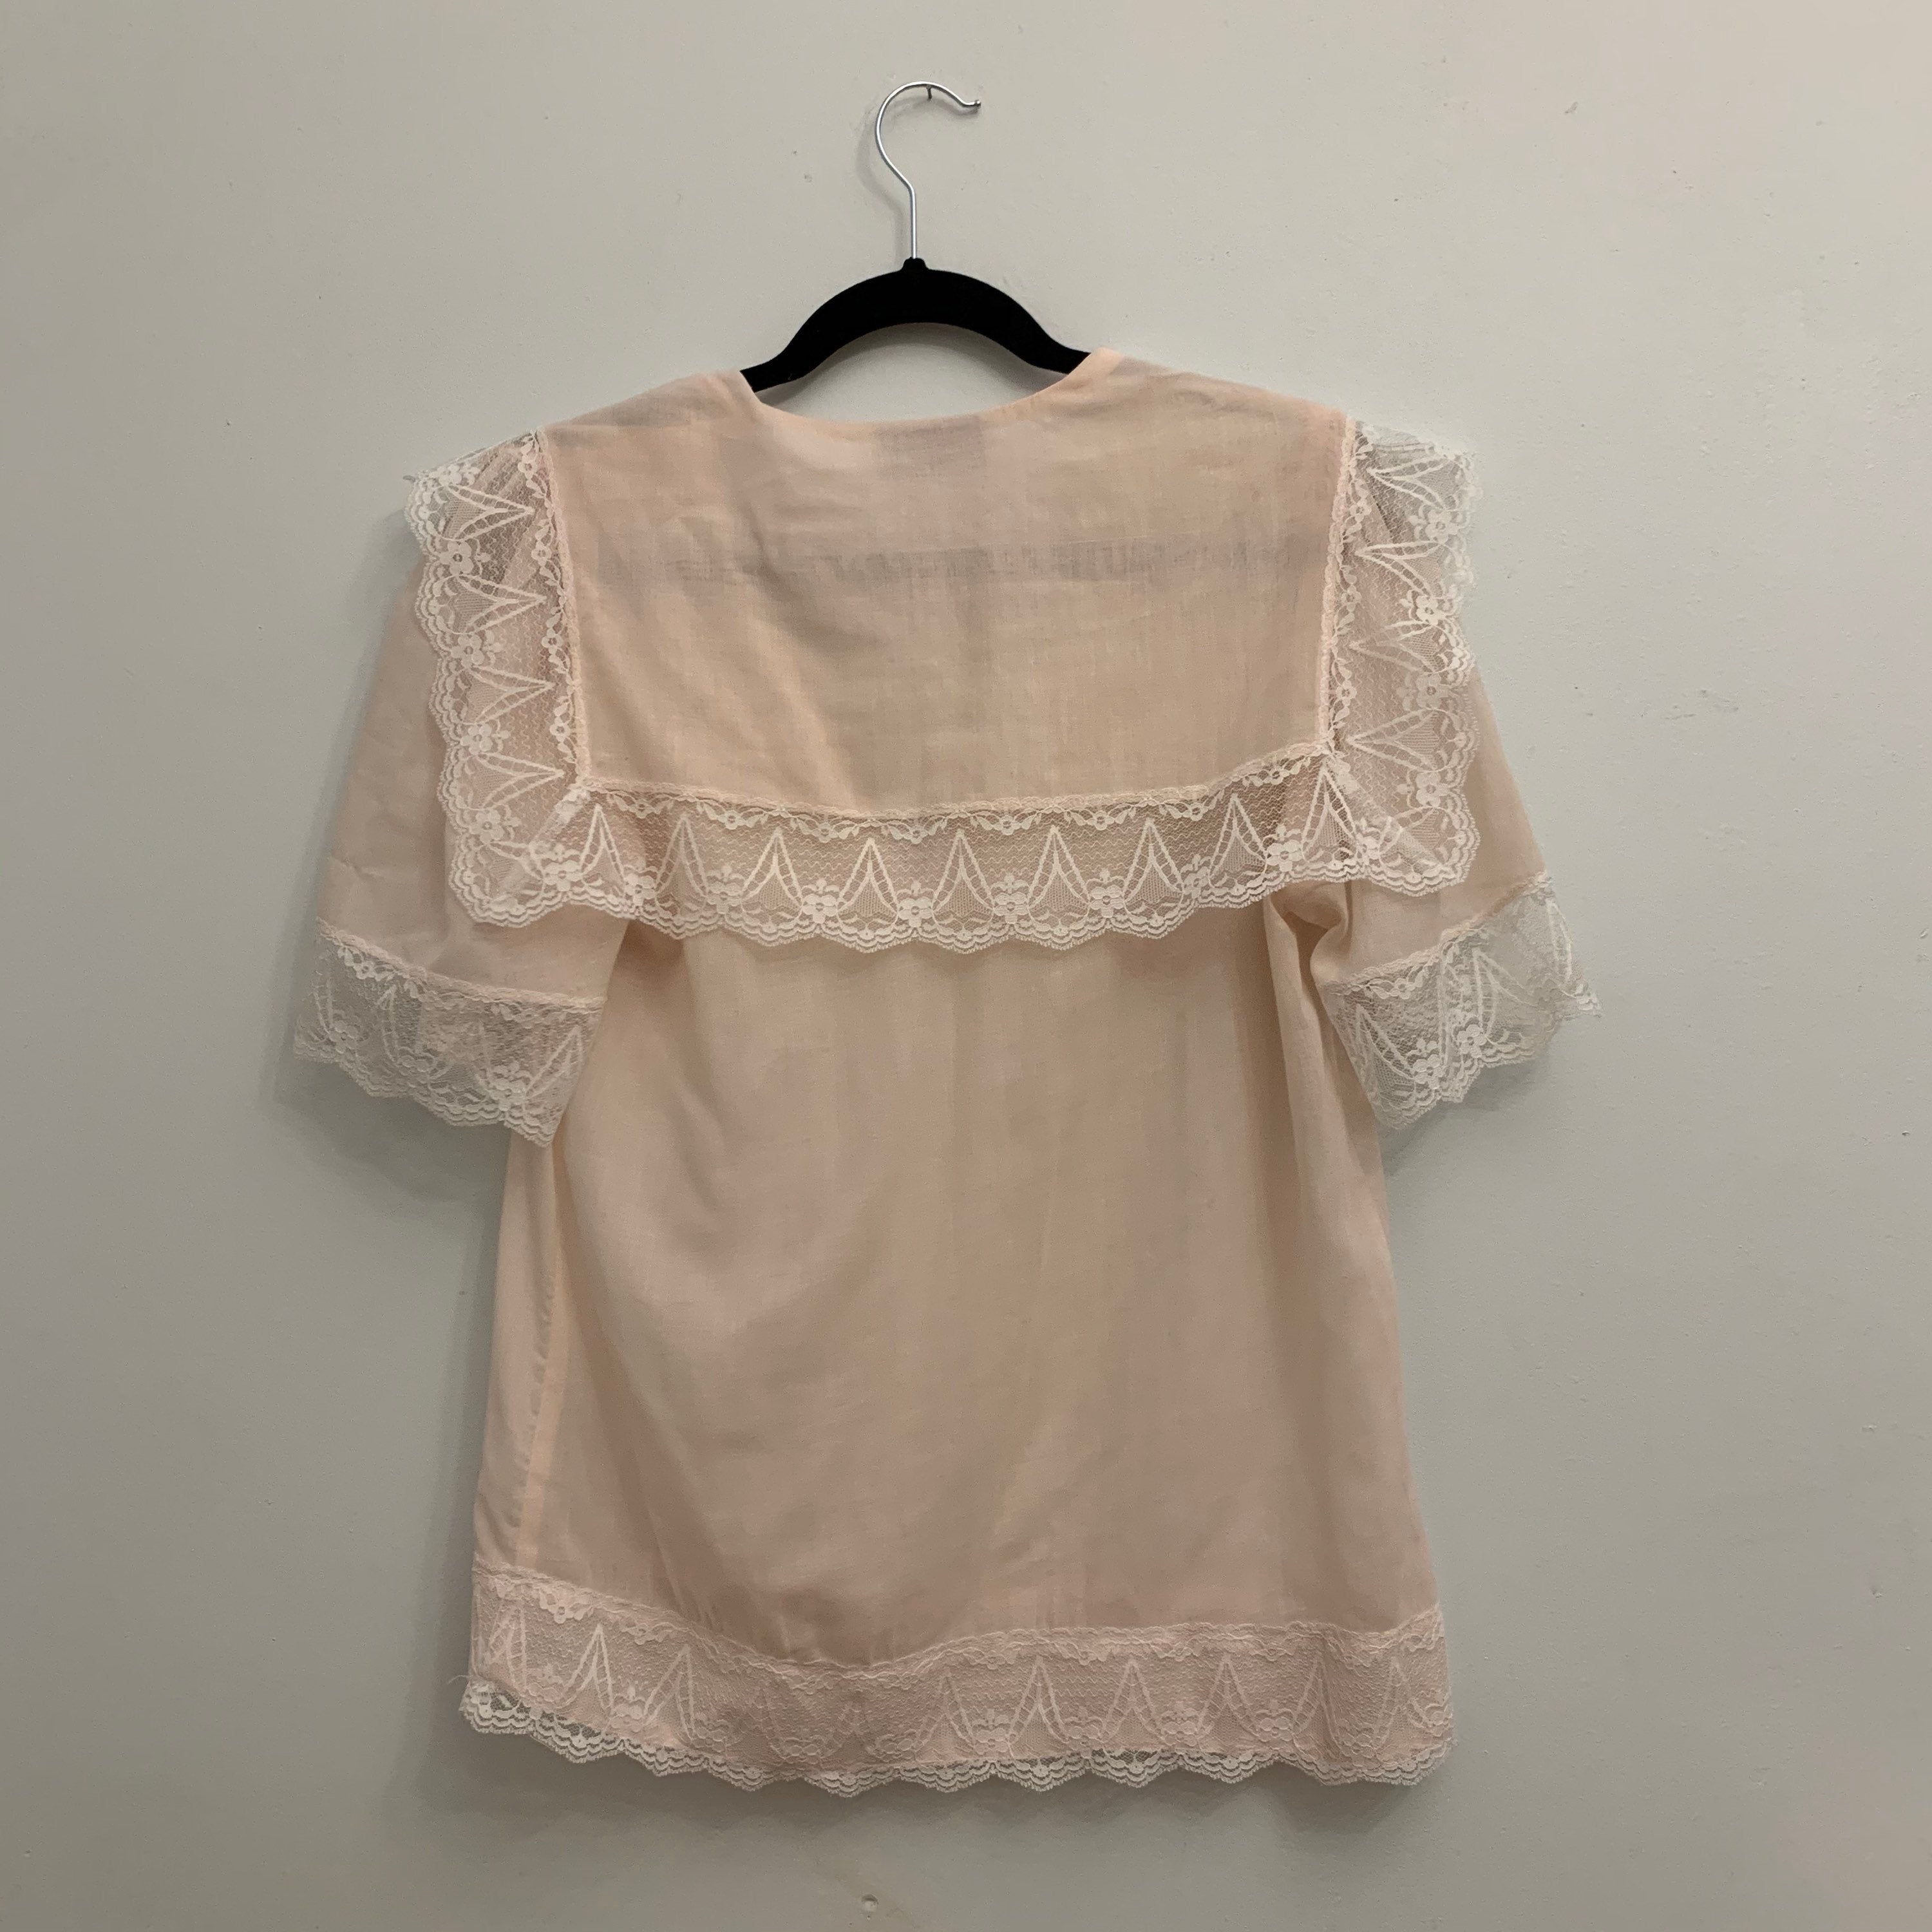 Vintage Pink and White Blouse by Jessica McClintock | Shop THRILLING